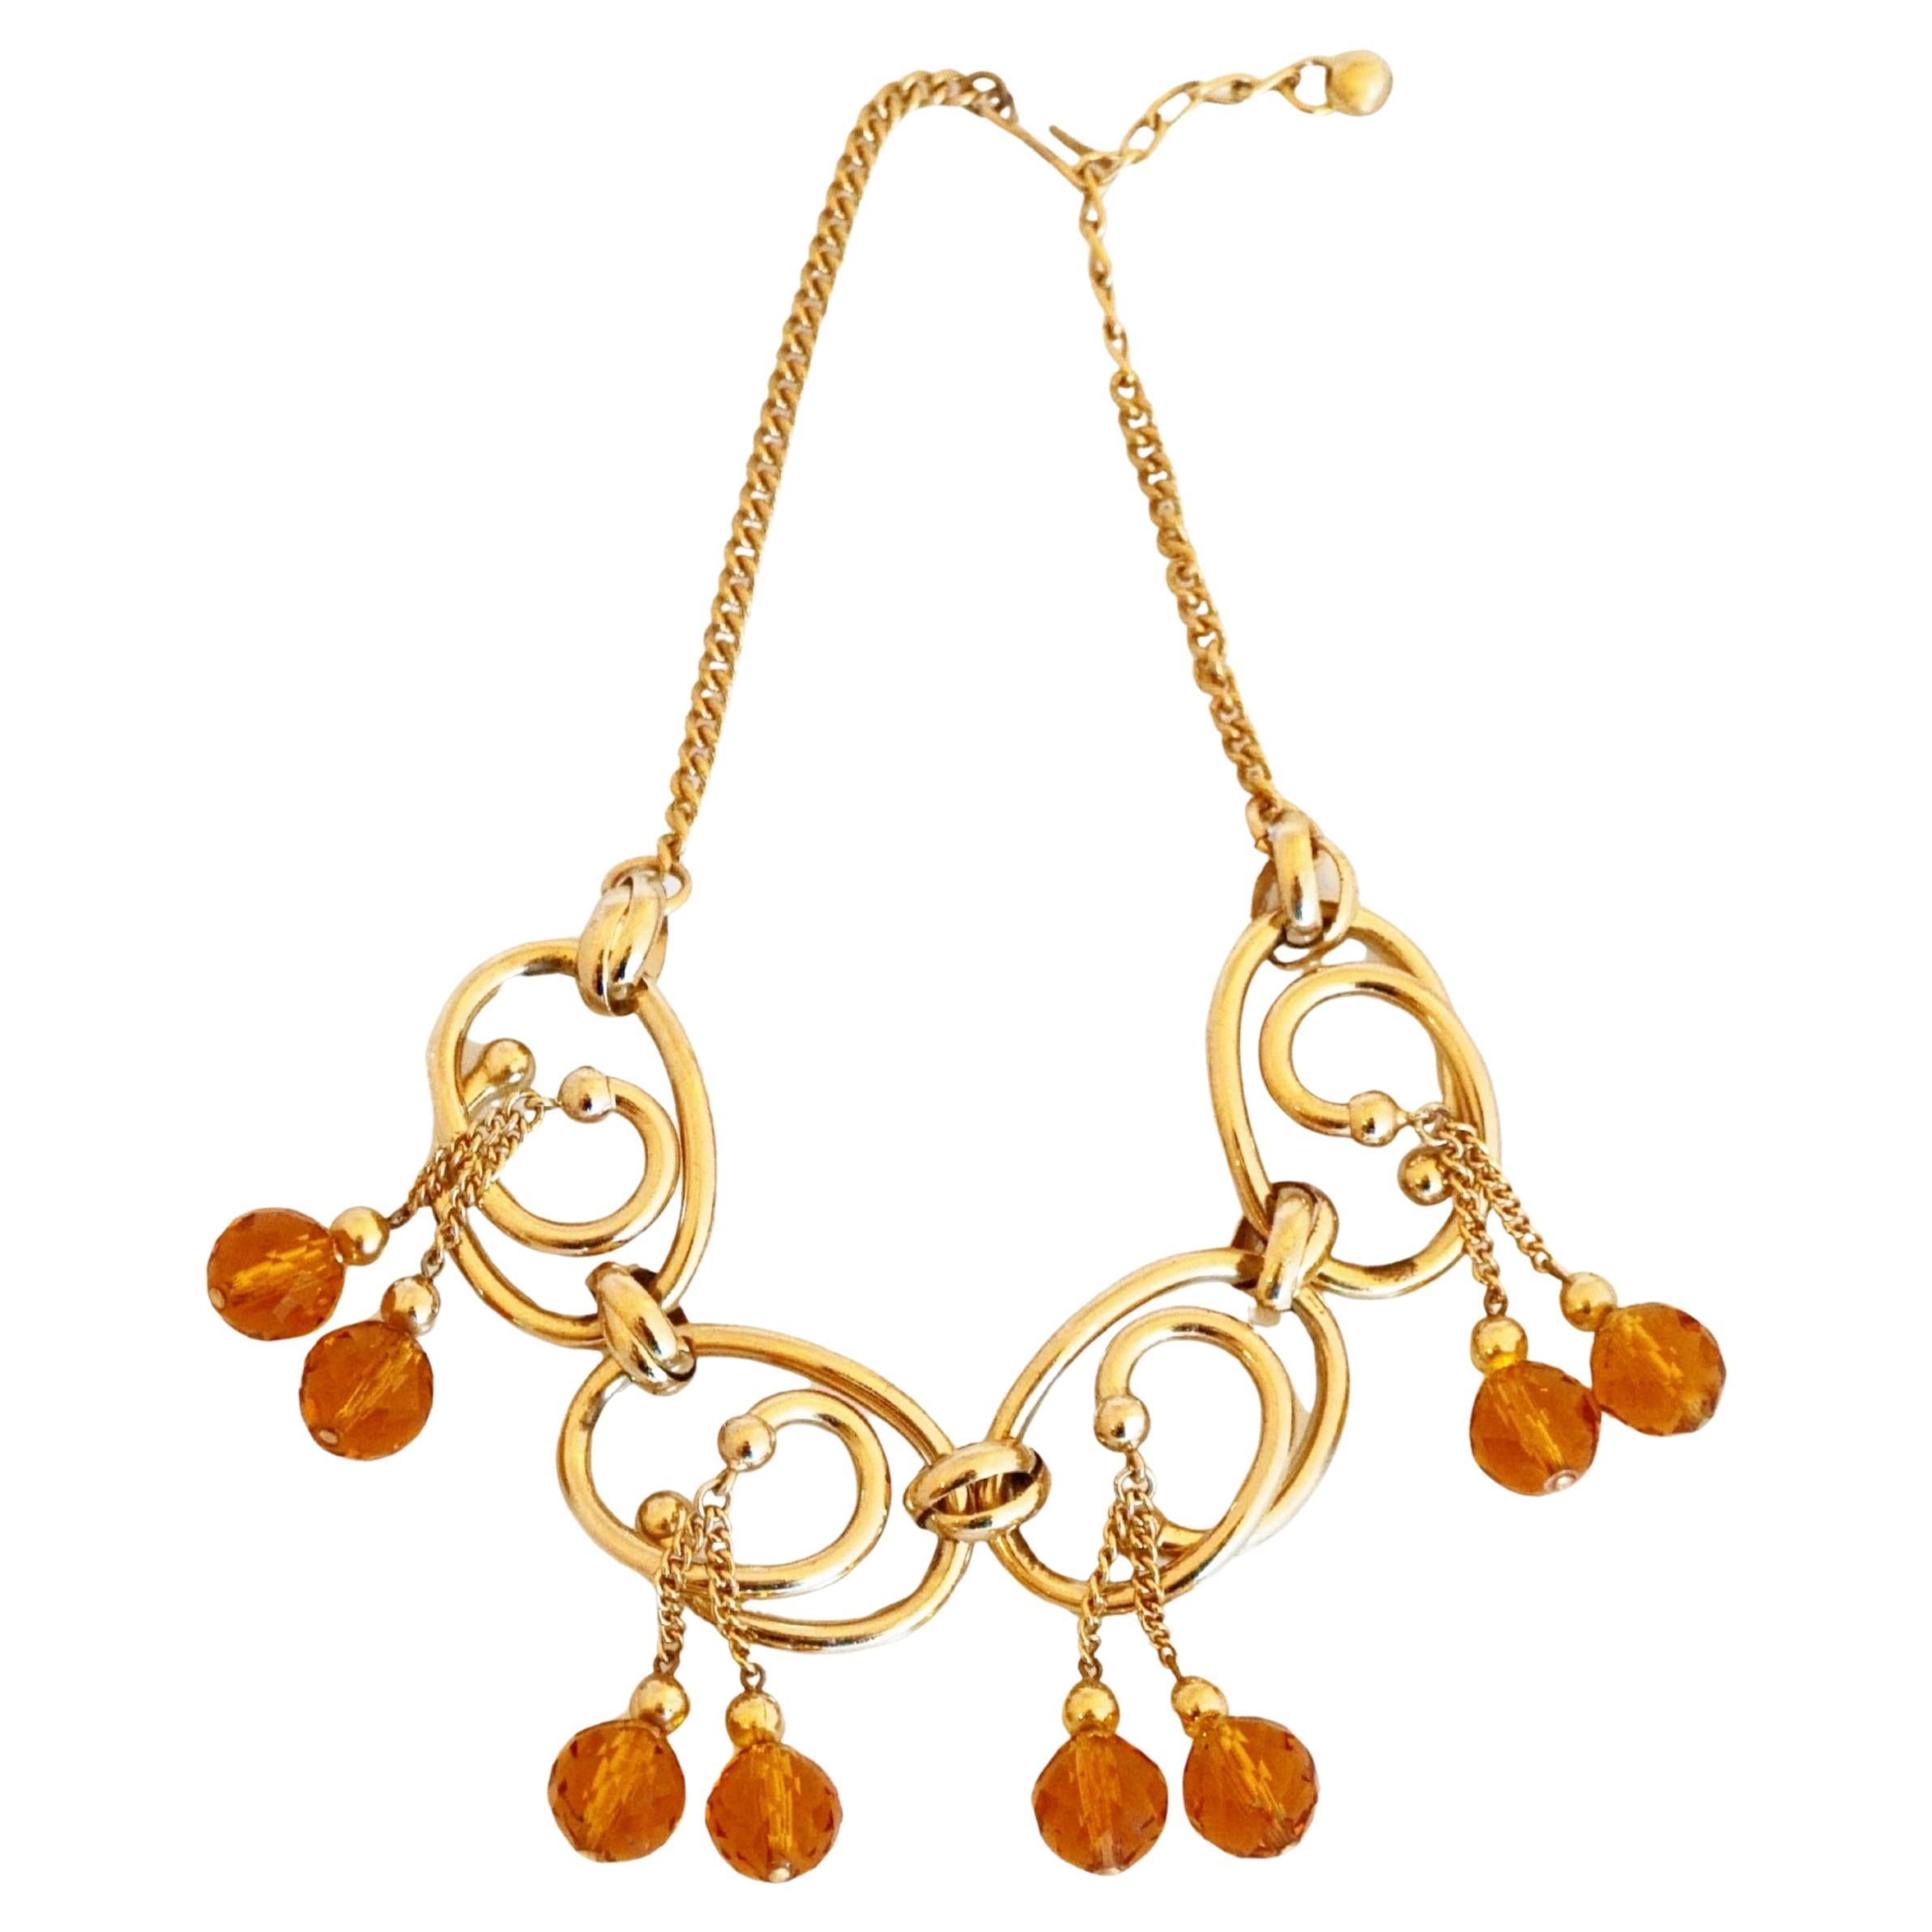 Gilded Swirl Link Choker Necklace With Amber Bead Dangles By Napier, 1950s For Sale